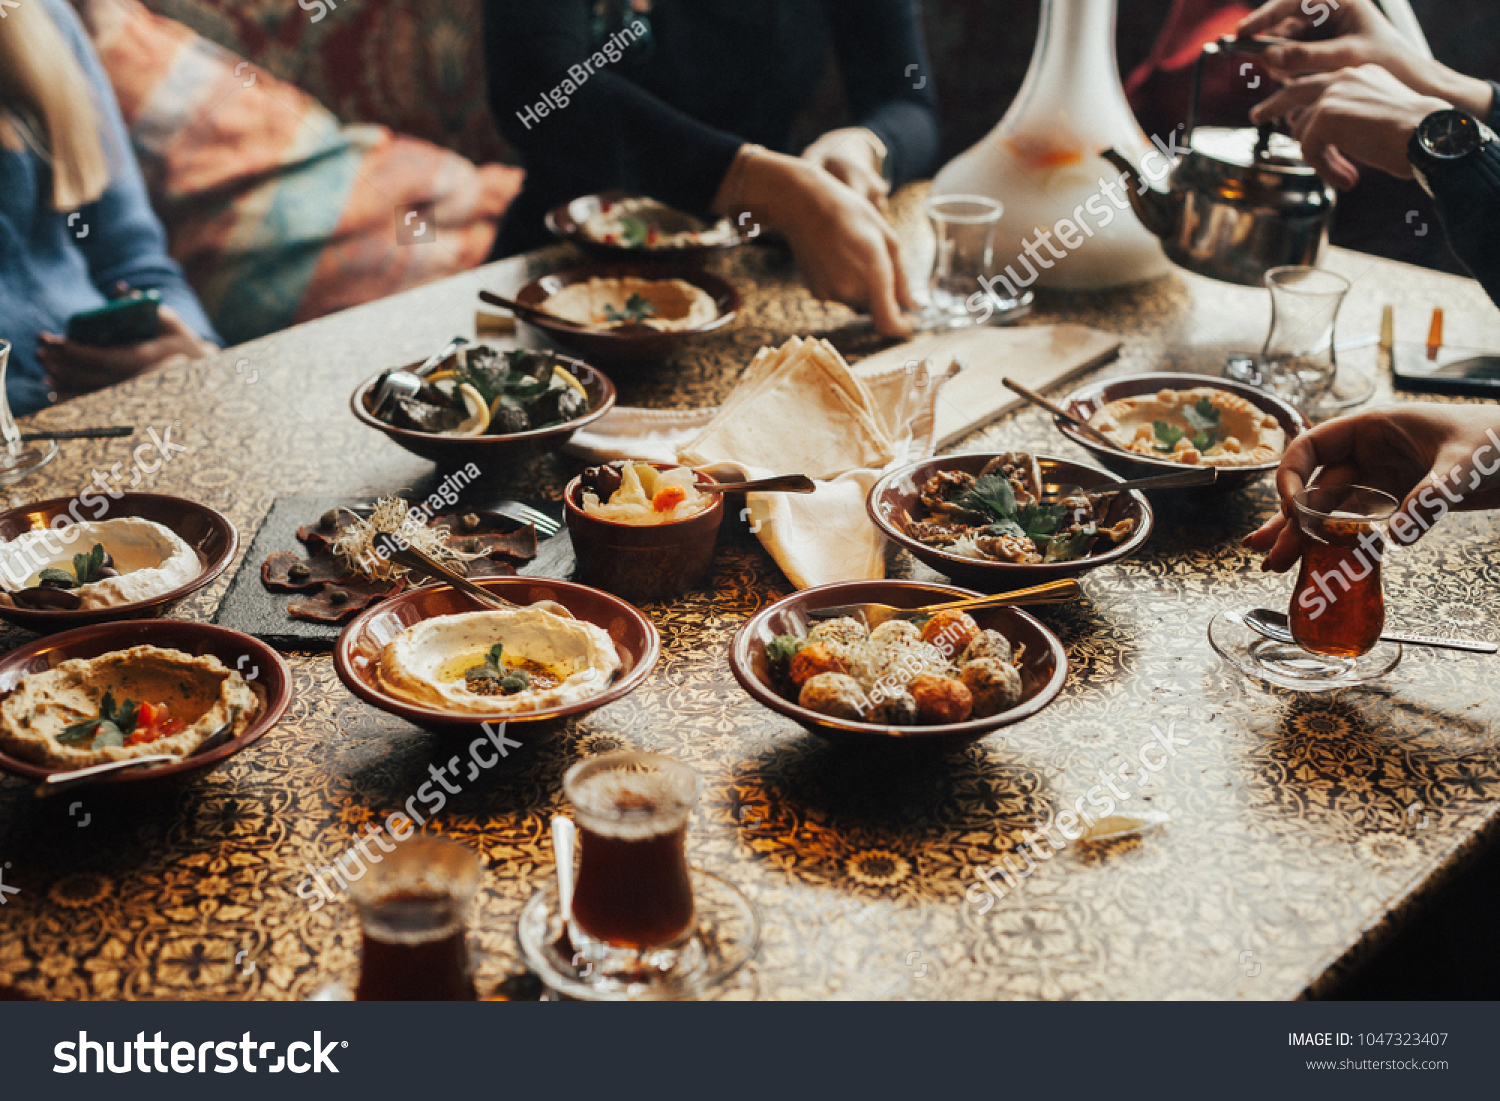 Lebanon cuisine served in restaurant. A young company of people is smoking a hookah and communicating in an oriental restaurant. Traditional meze lunch #1047323407